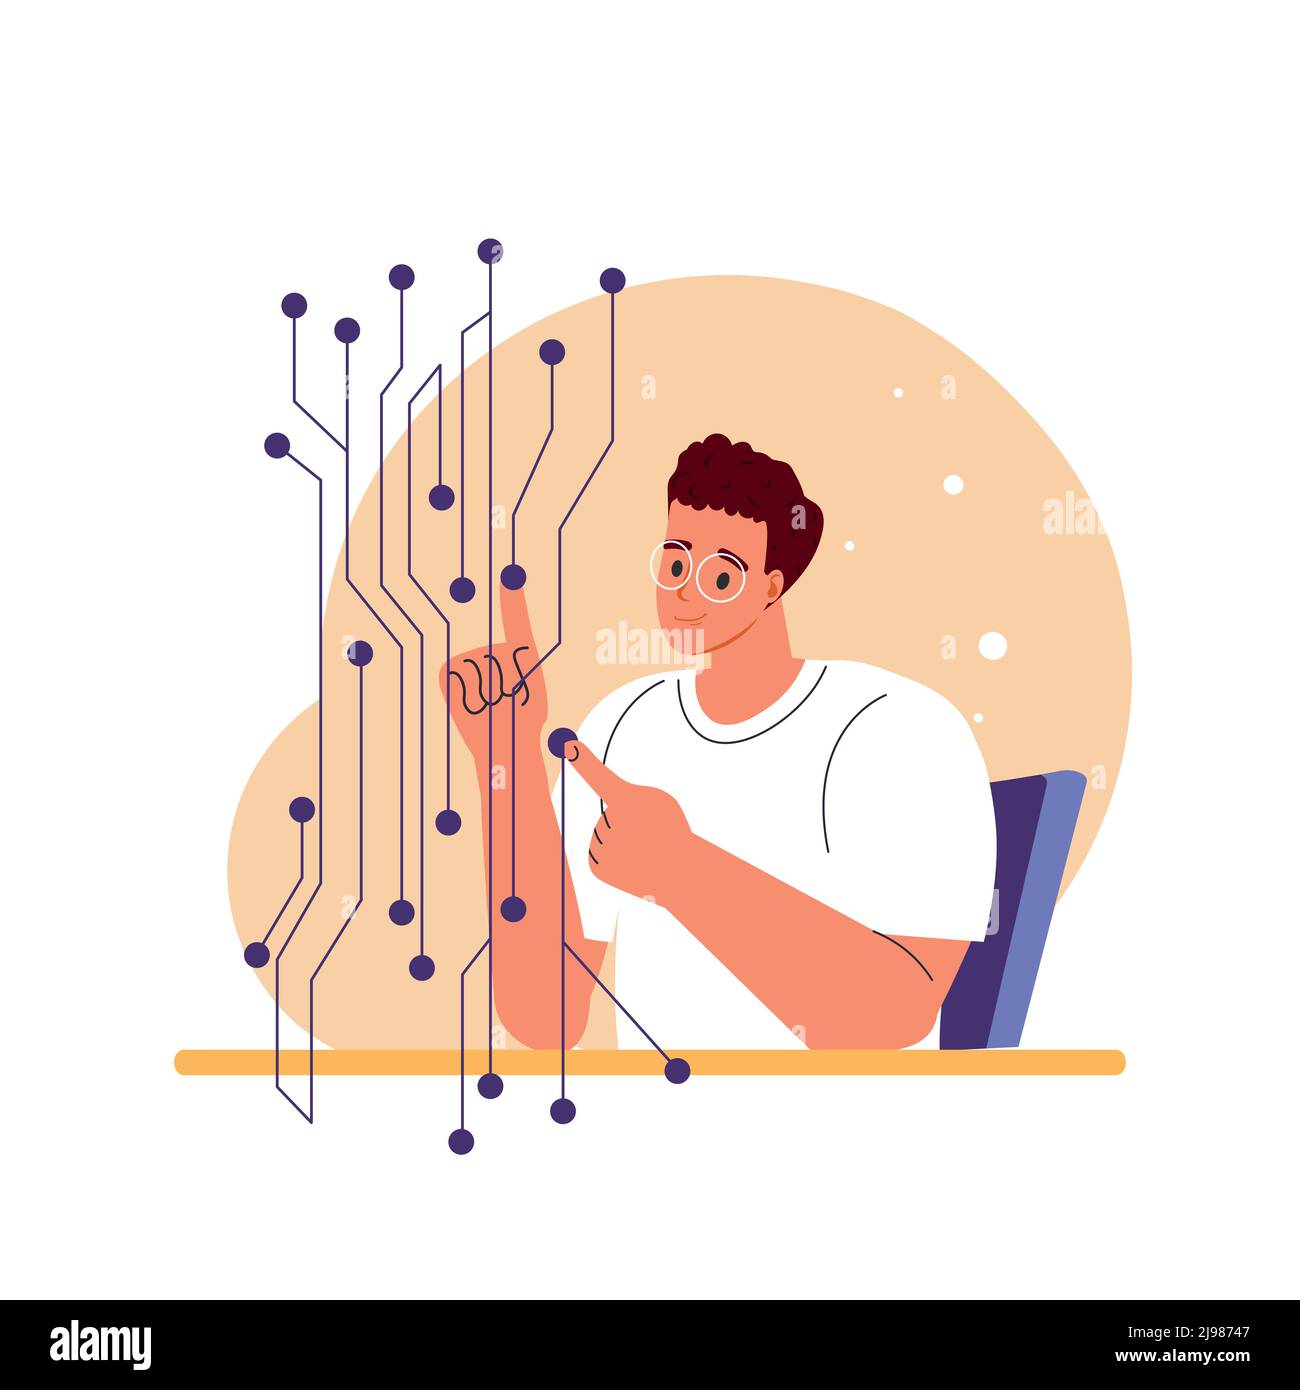 Man fixing technical equipment. Different mental mindset types. People with technical, logical thinking. Mind behaviour, mental perceiving, psychological concept. Flat vector isolated illustration. Stock Vector